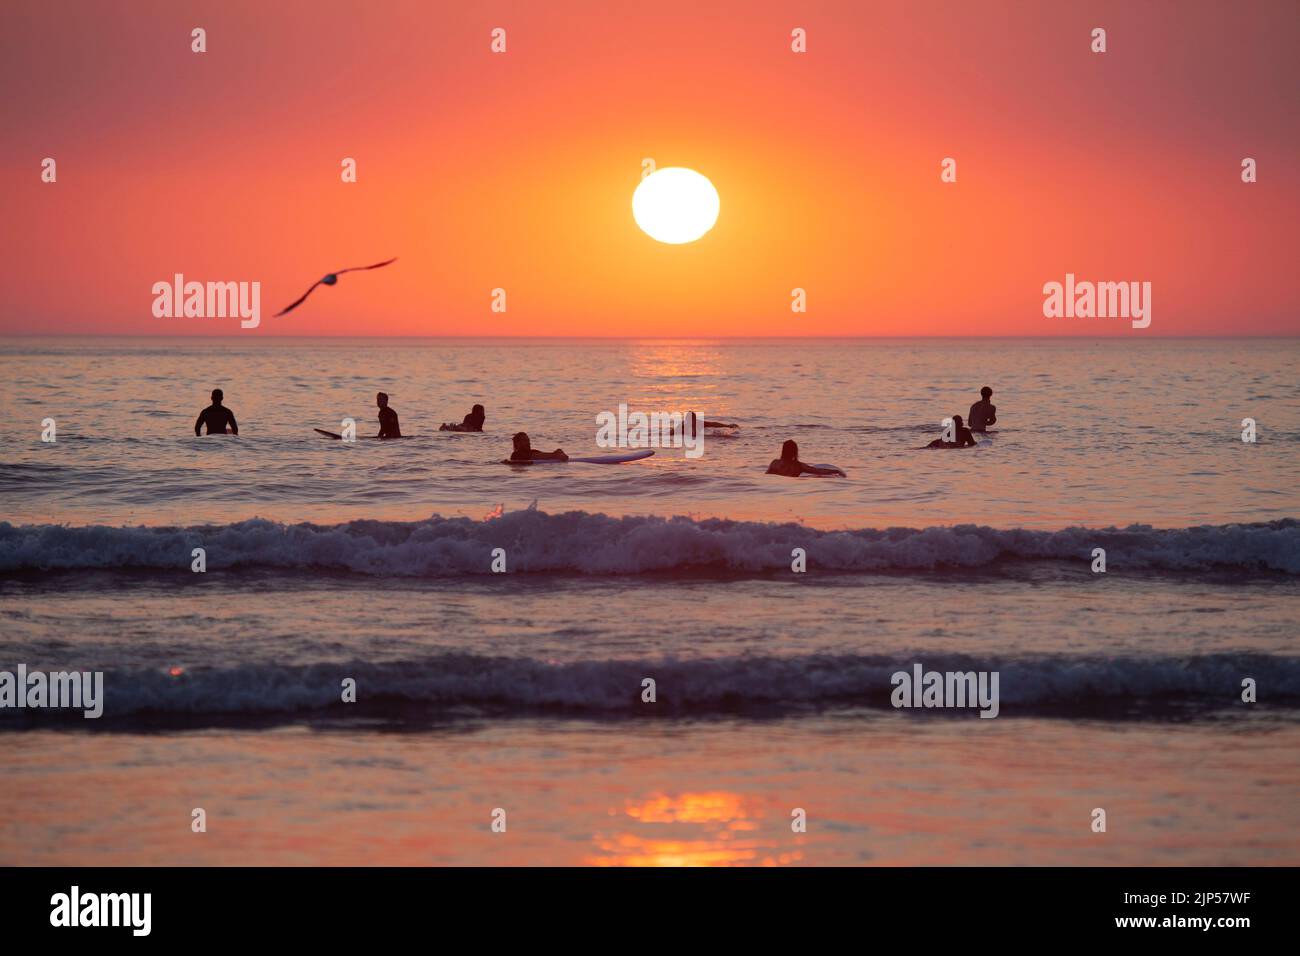 Surfers waiting for waves at sunset. Polzeath beach. Cornwall, England Stock Photo